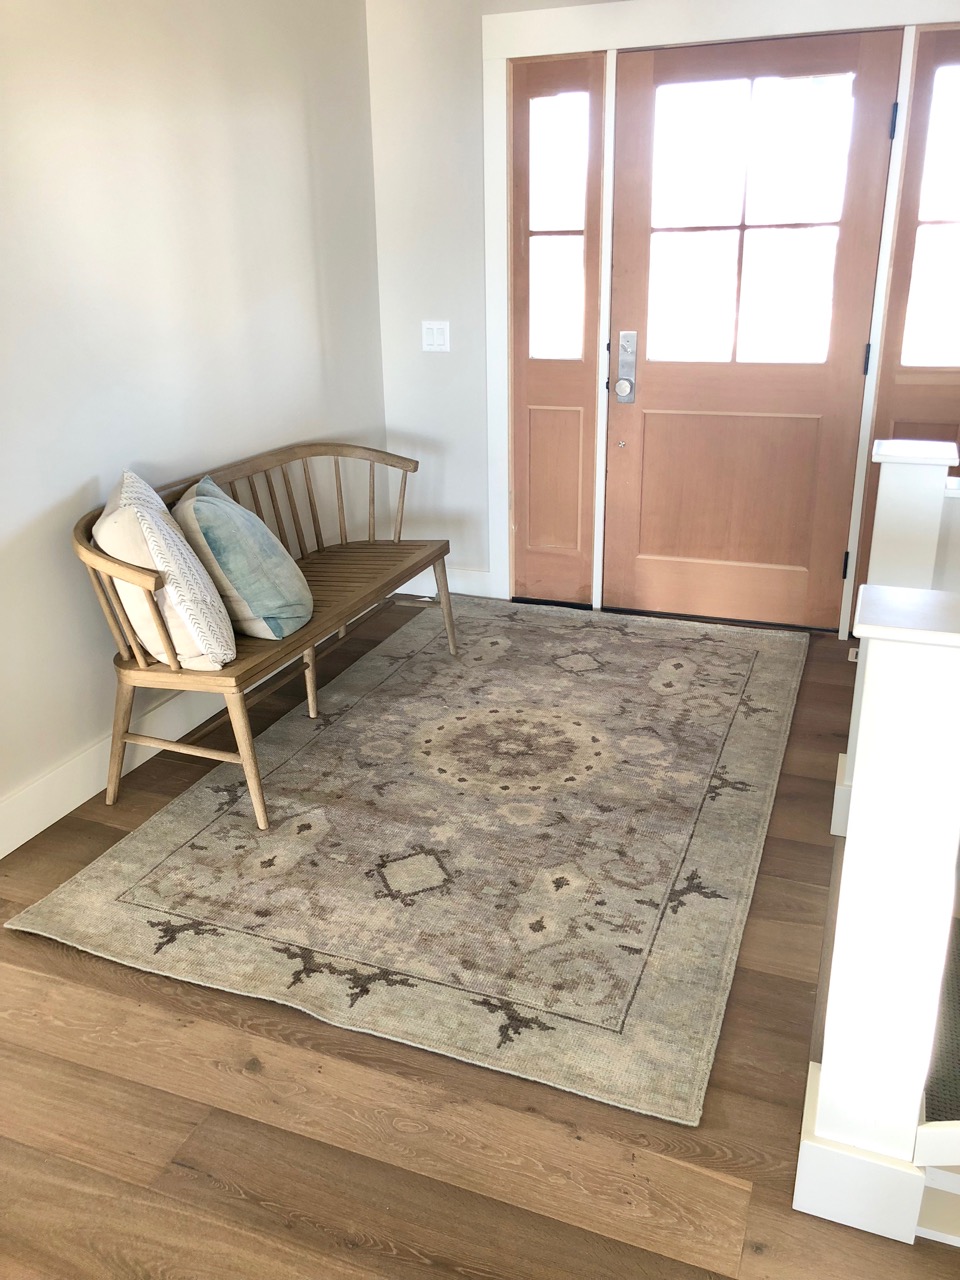  For the entry, a beautiful hand-knotted wool rug that is as durable as it is gorgeous!&nbsp; A bit of color without distracting from the natural beauty of the wood floors and trim. 